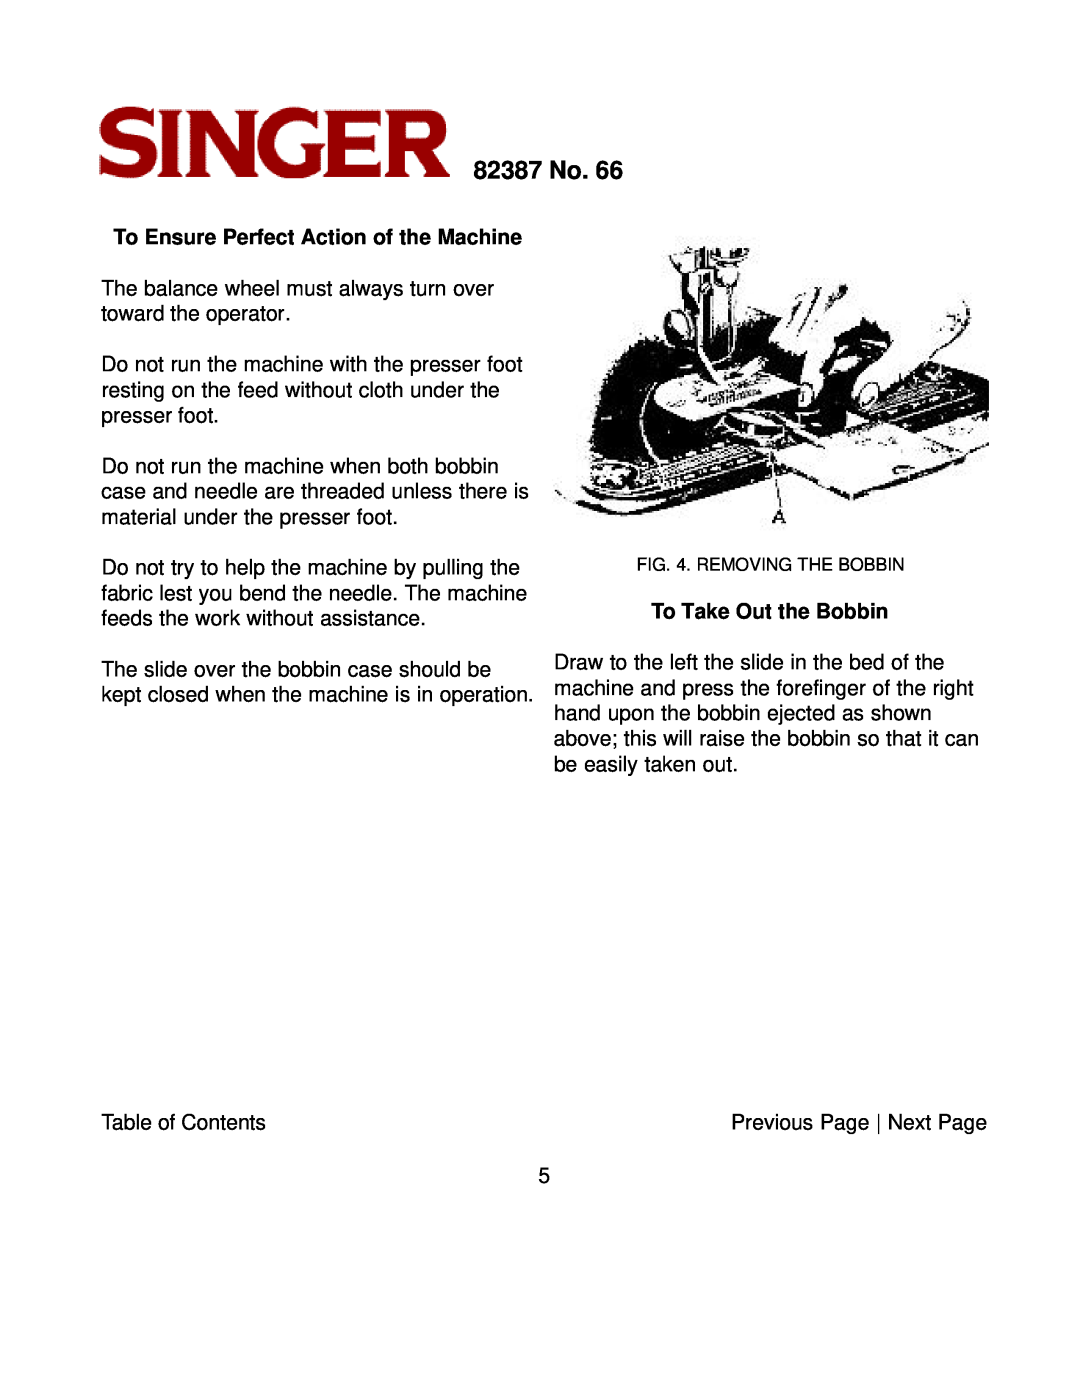 Singer instruction manual To Ensure Perfect Action of the Machine, To Take Out the Bobbin, 82387 No, Removing The Bobbin 